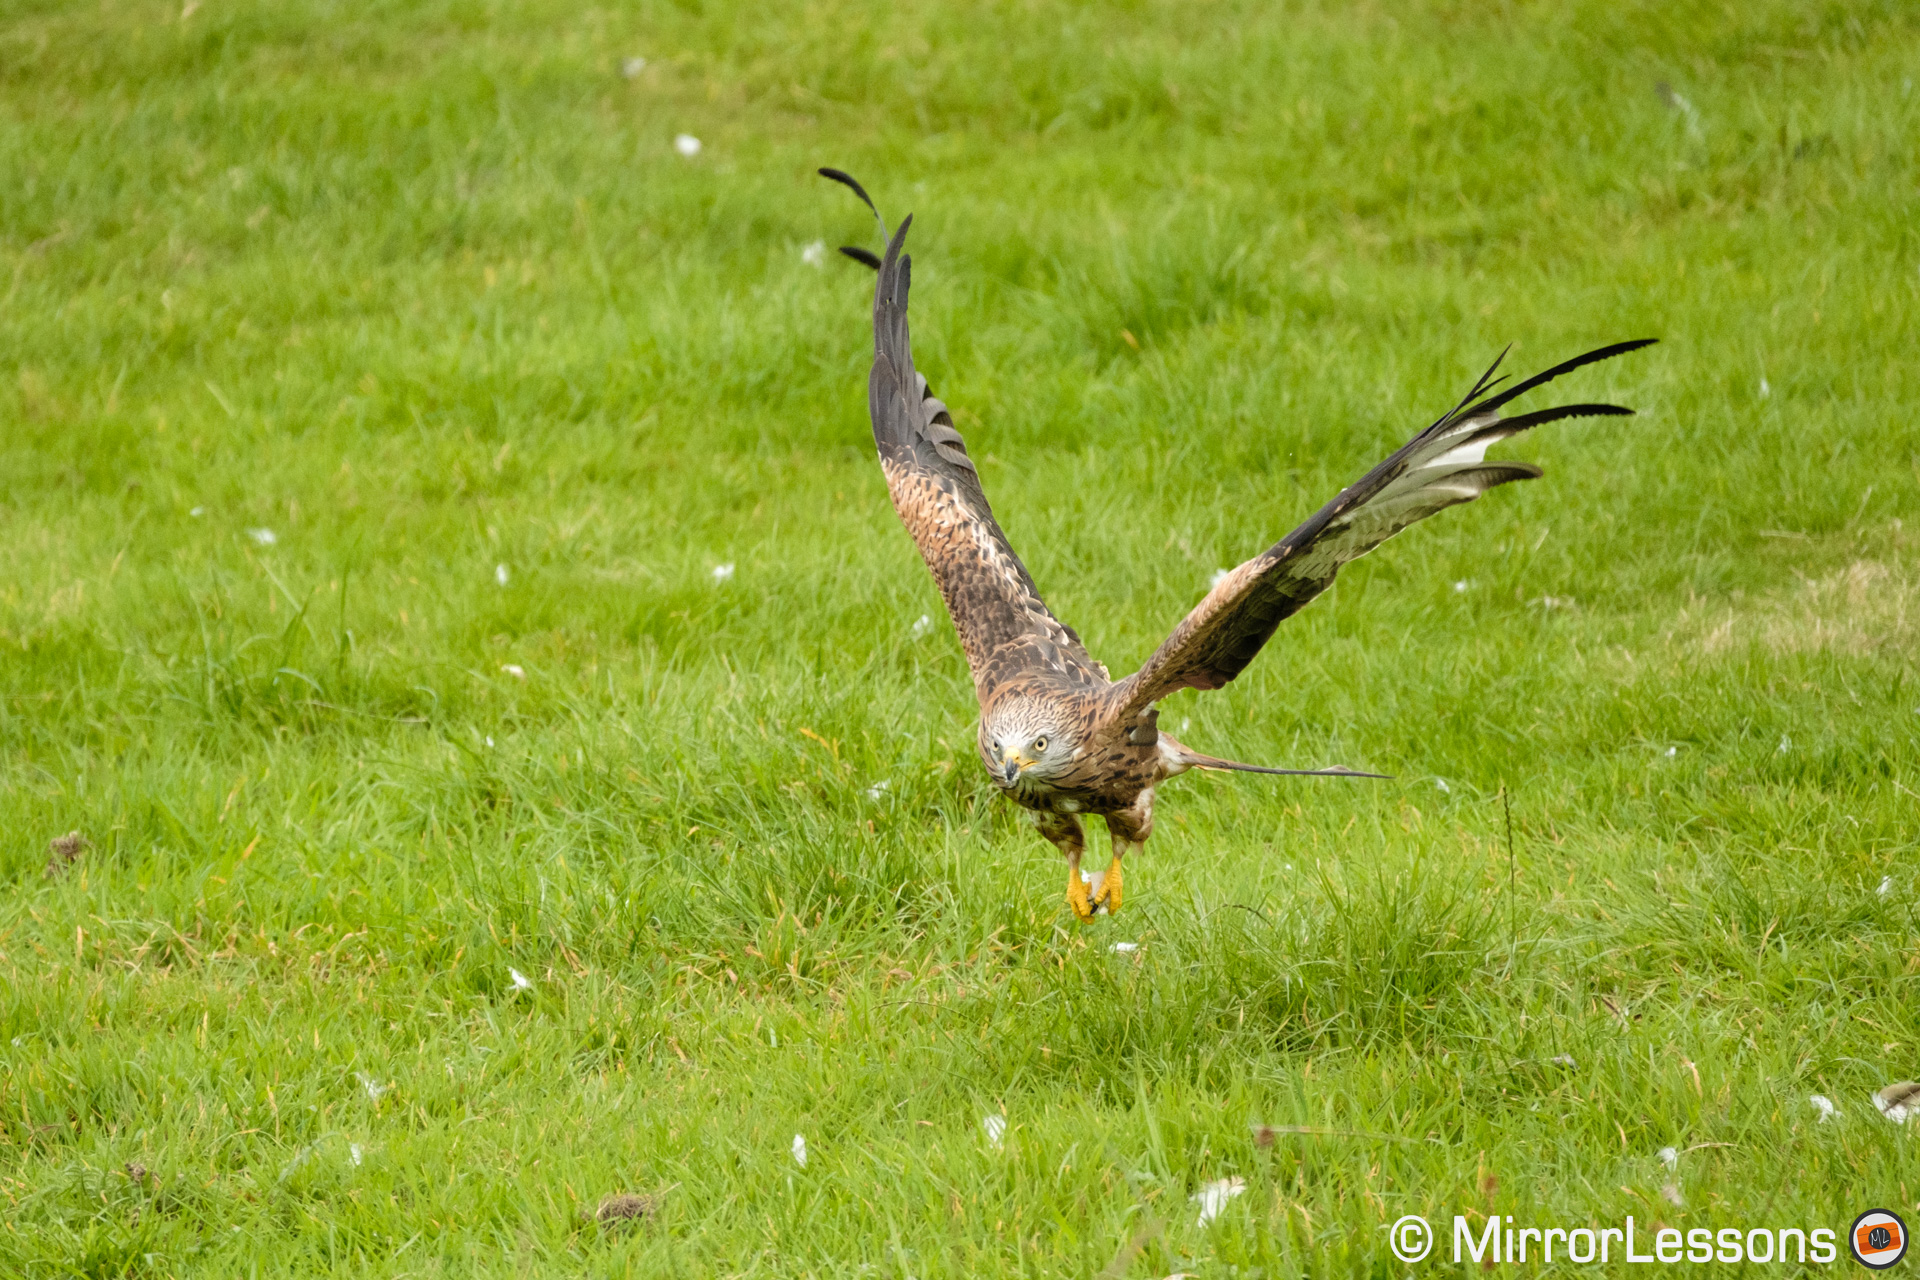 Red kite flying low on the ground